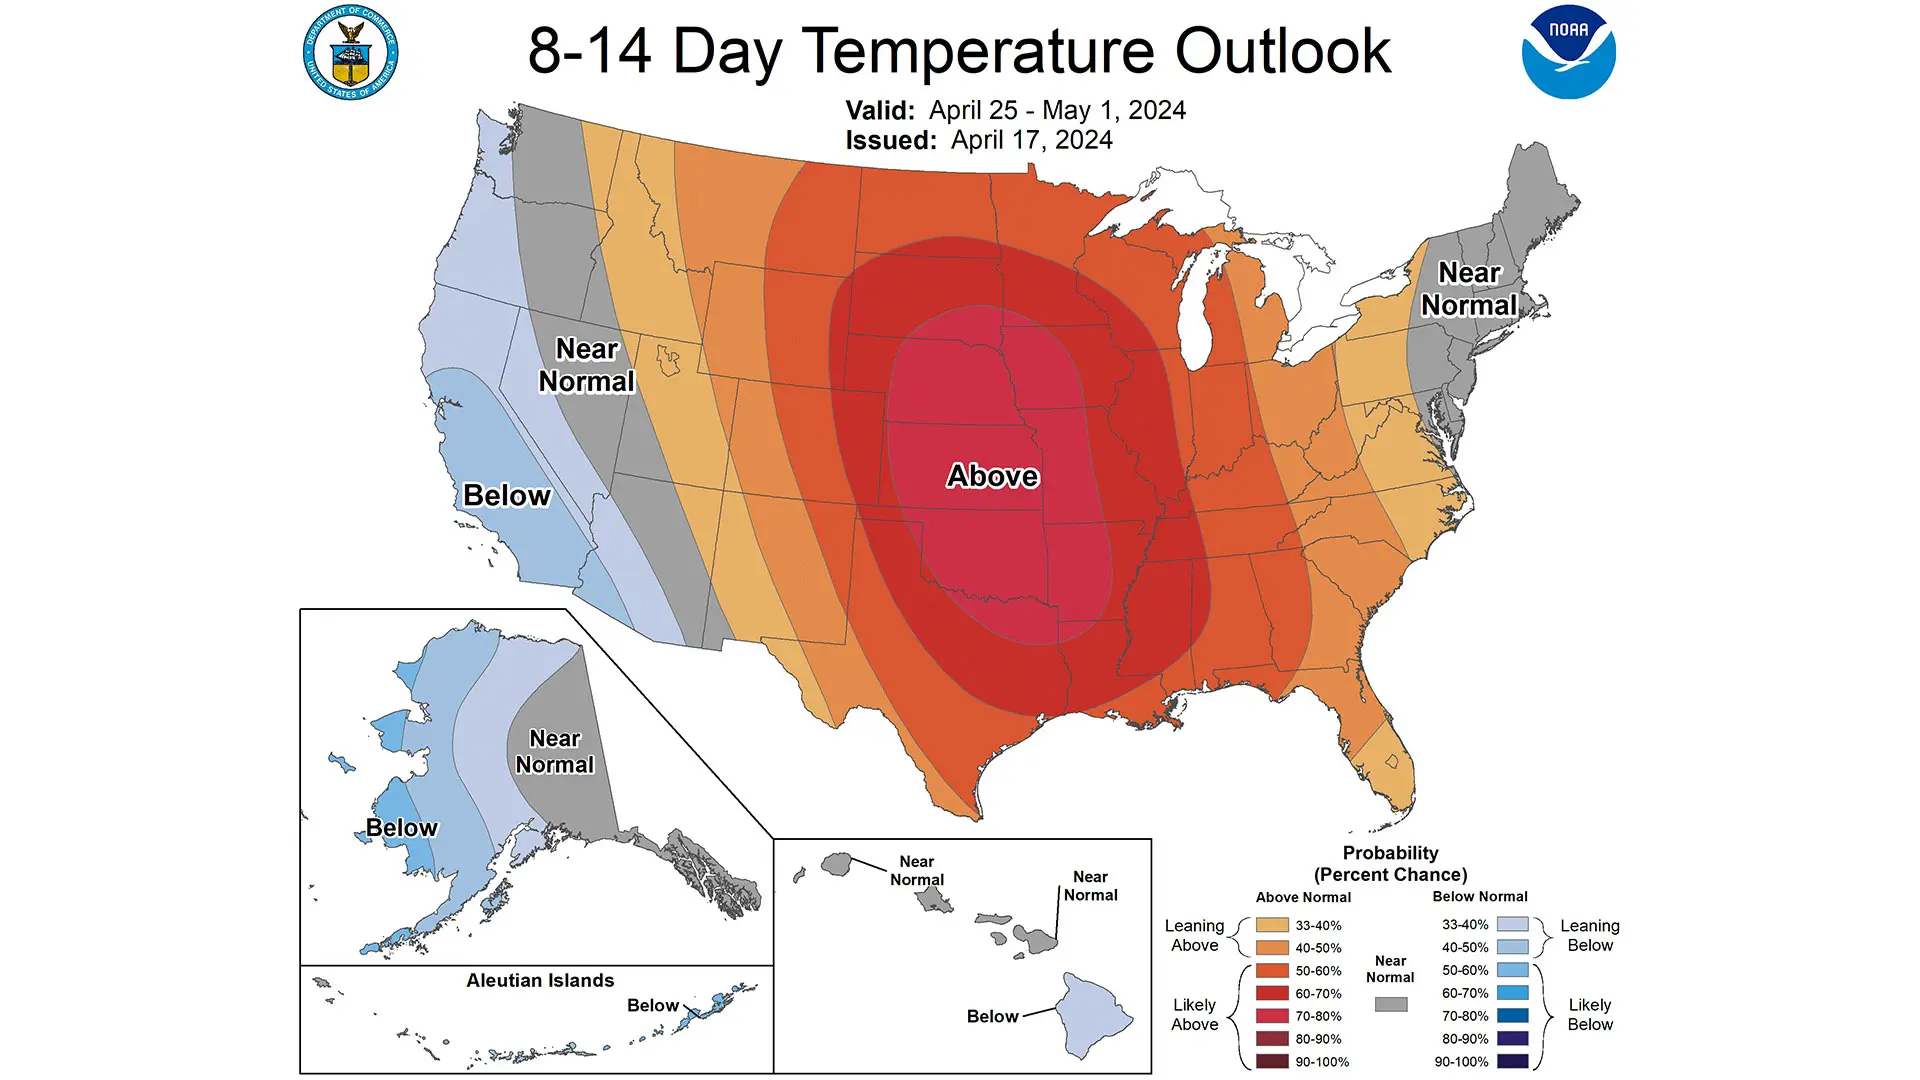 The 8 to 14 day temperature outlook for the U.S. through May 1, 2024.